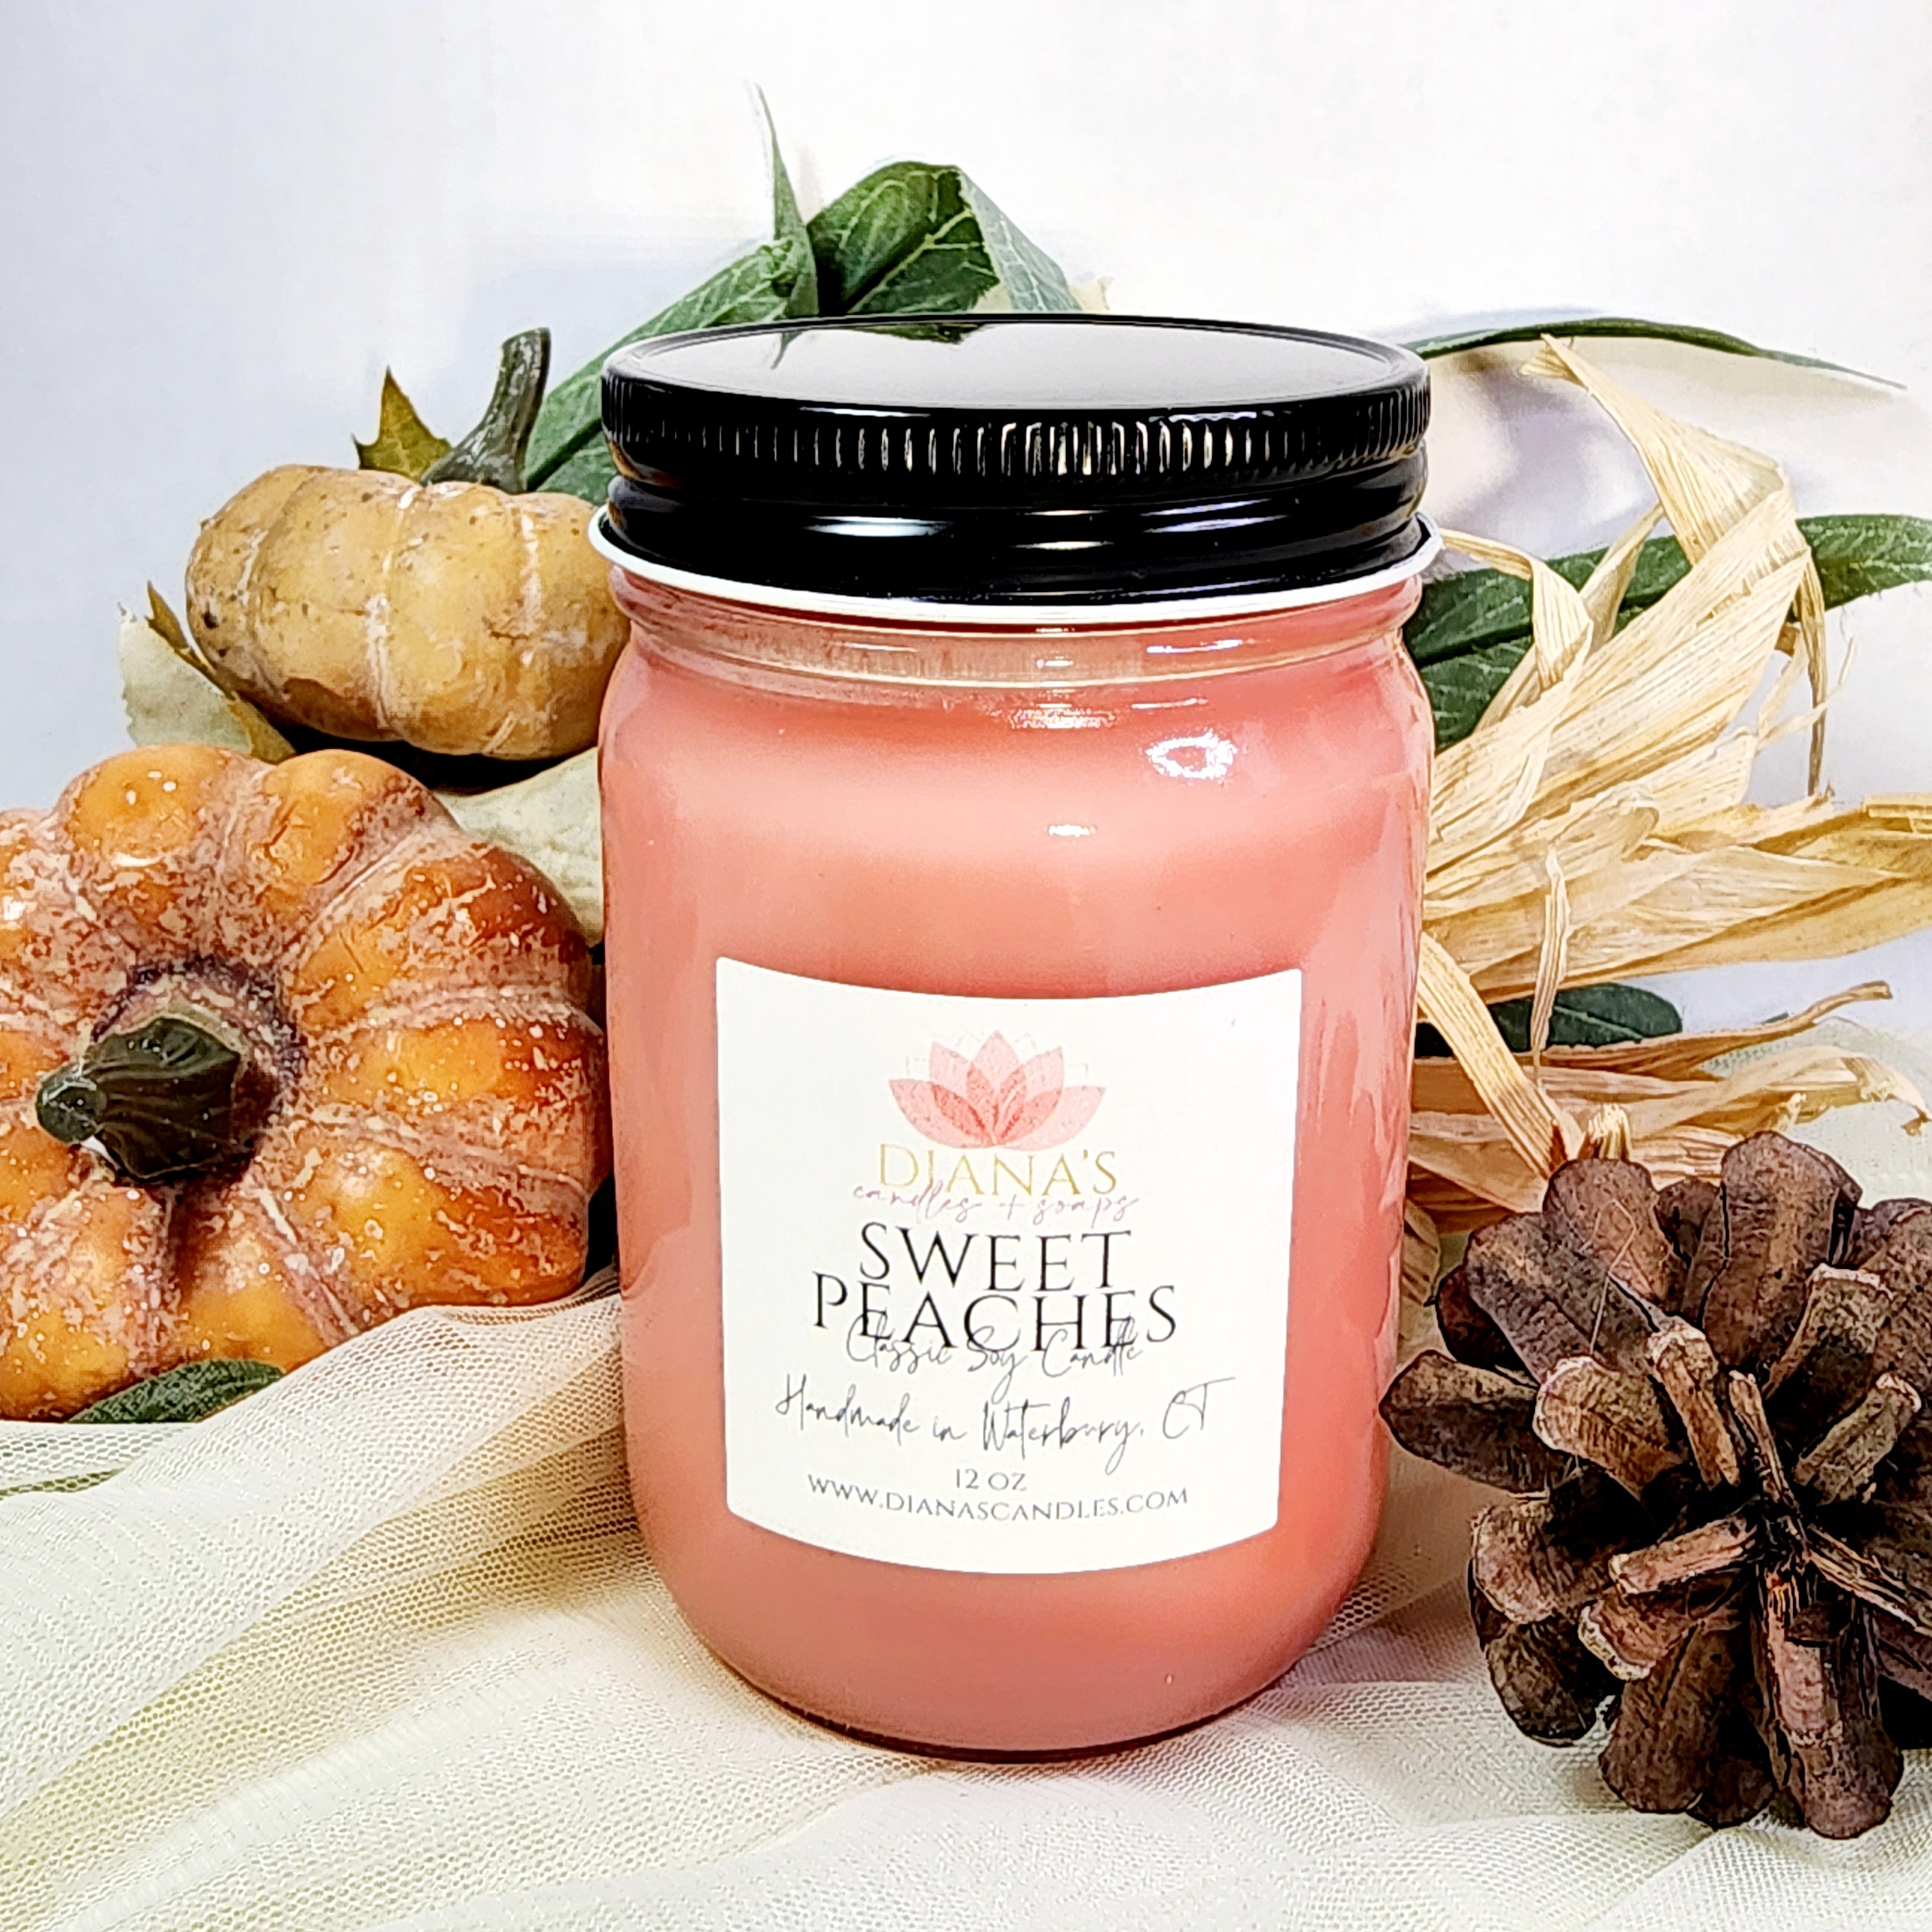 Sweet Peaches Jar Candle Diana's Candles and Soaps 